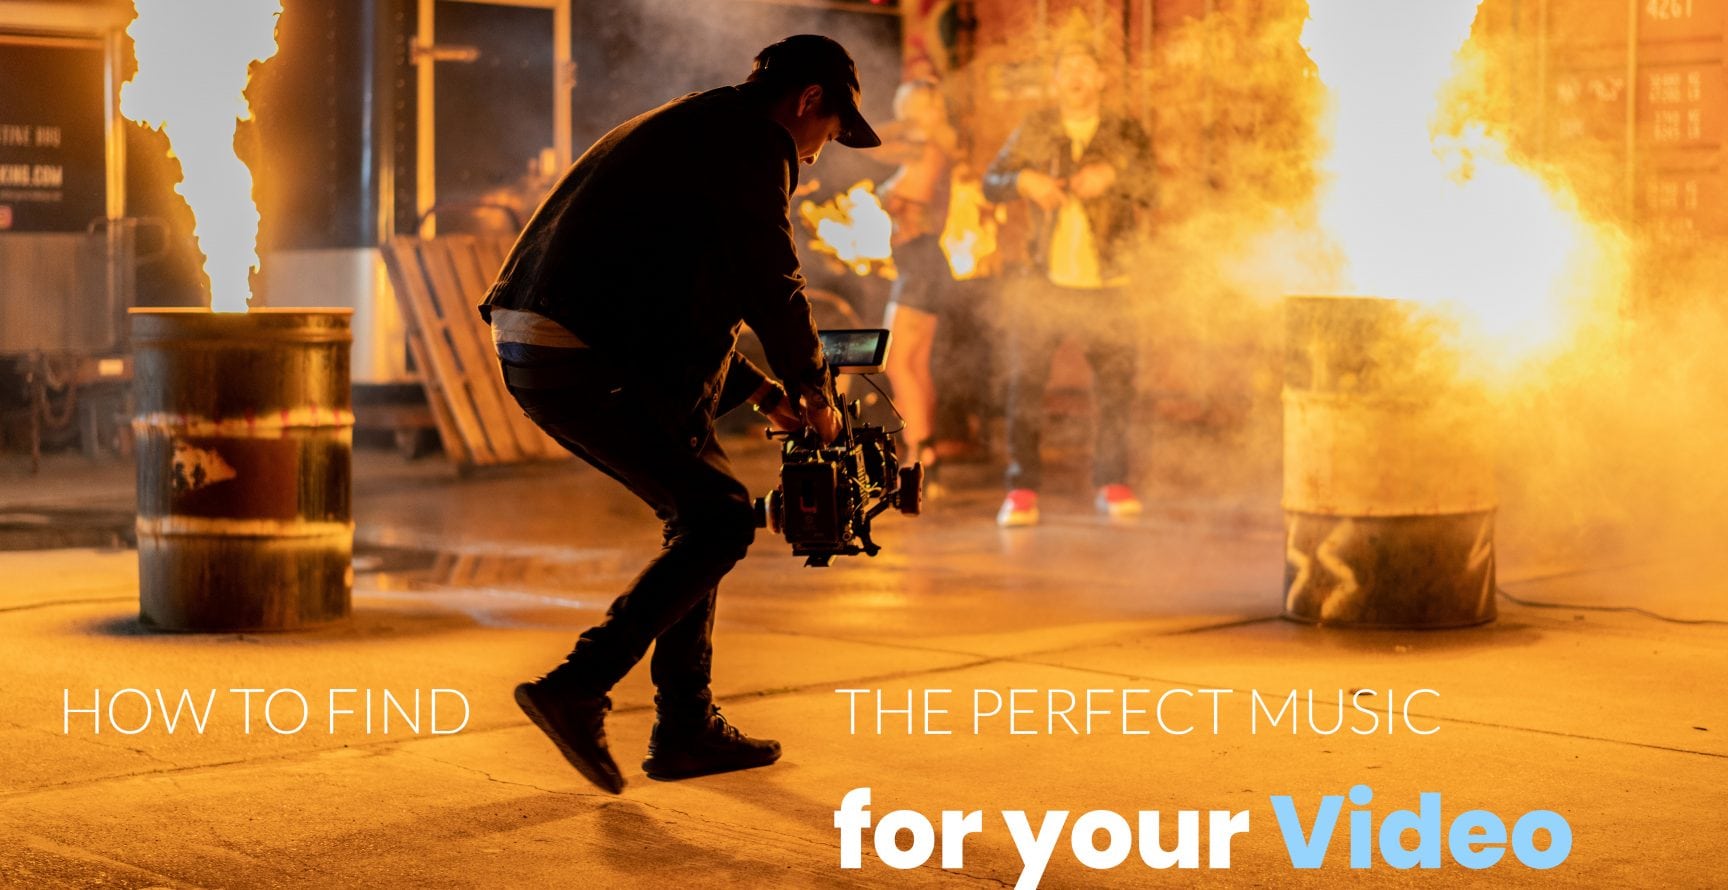 How to Find the Perfect Music for your Video - Camera Man Shoots Fire Scene